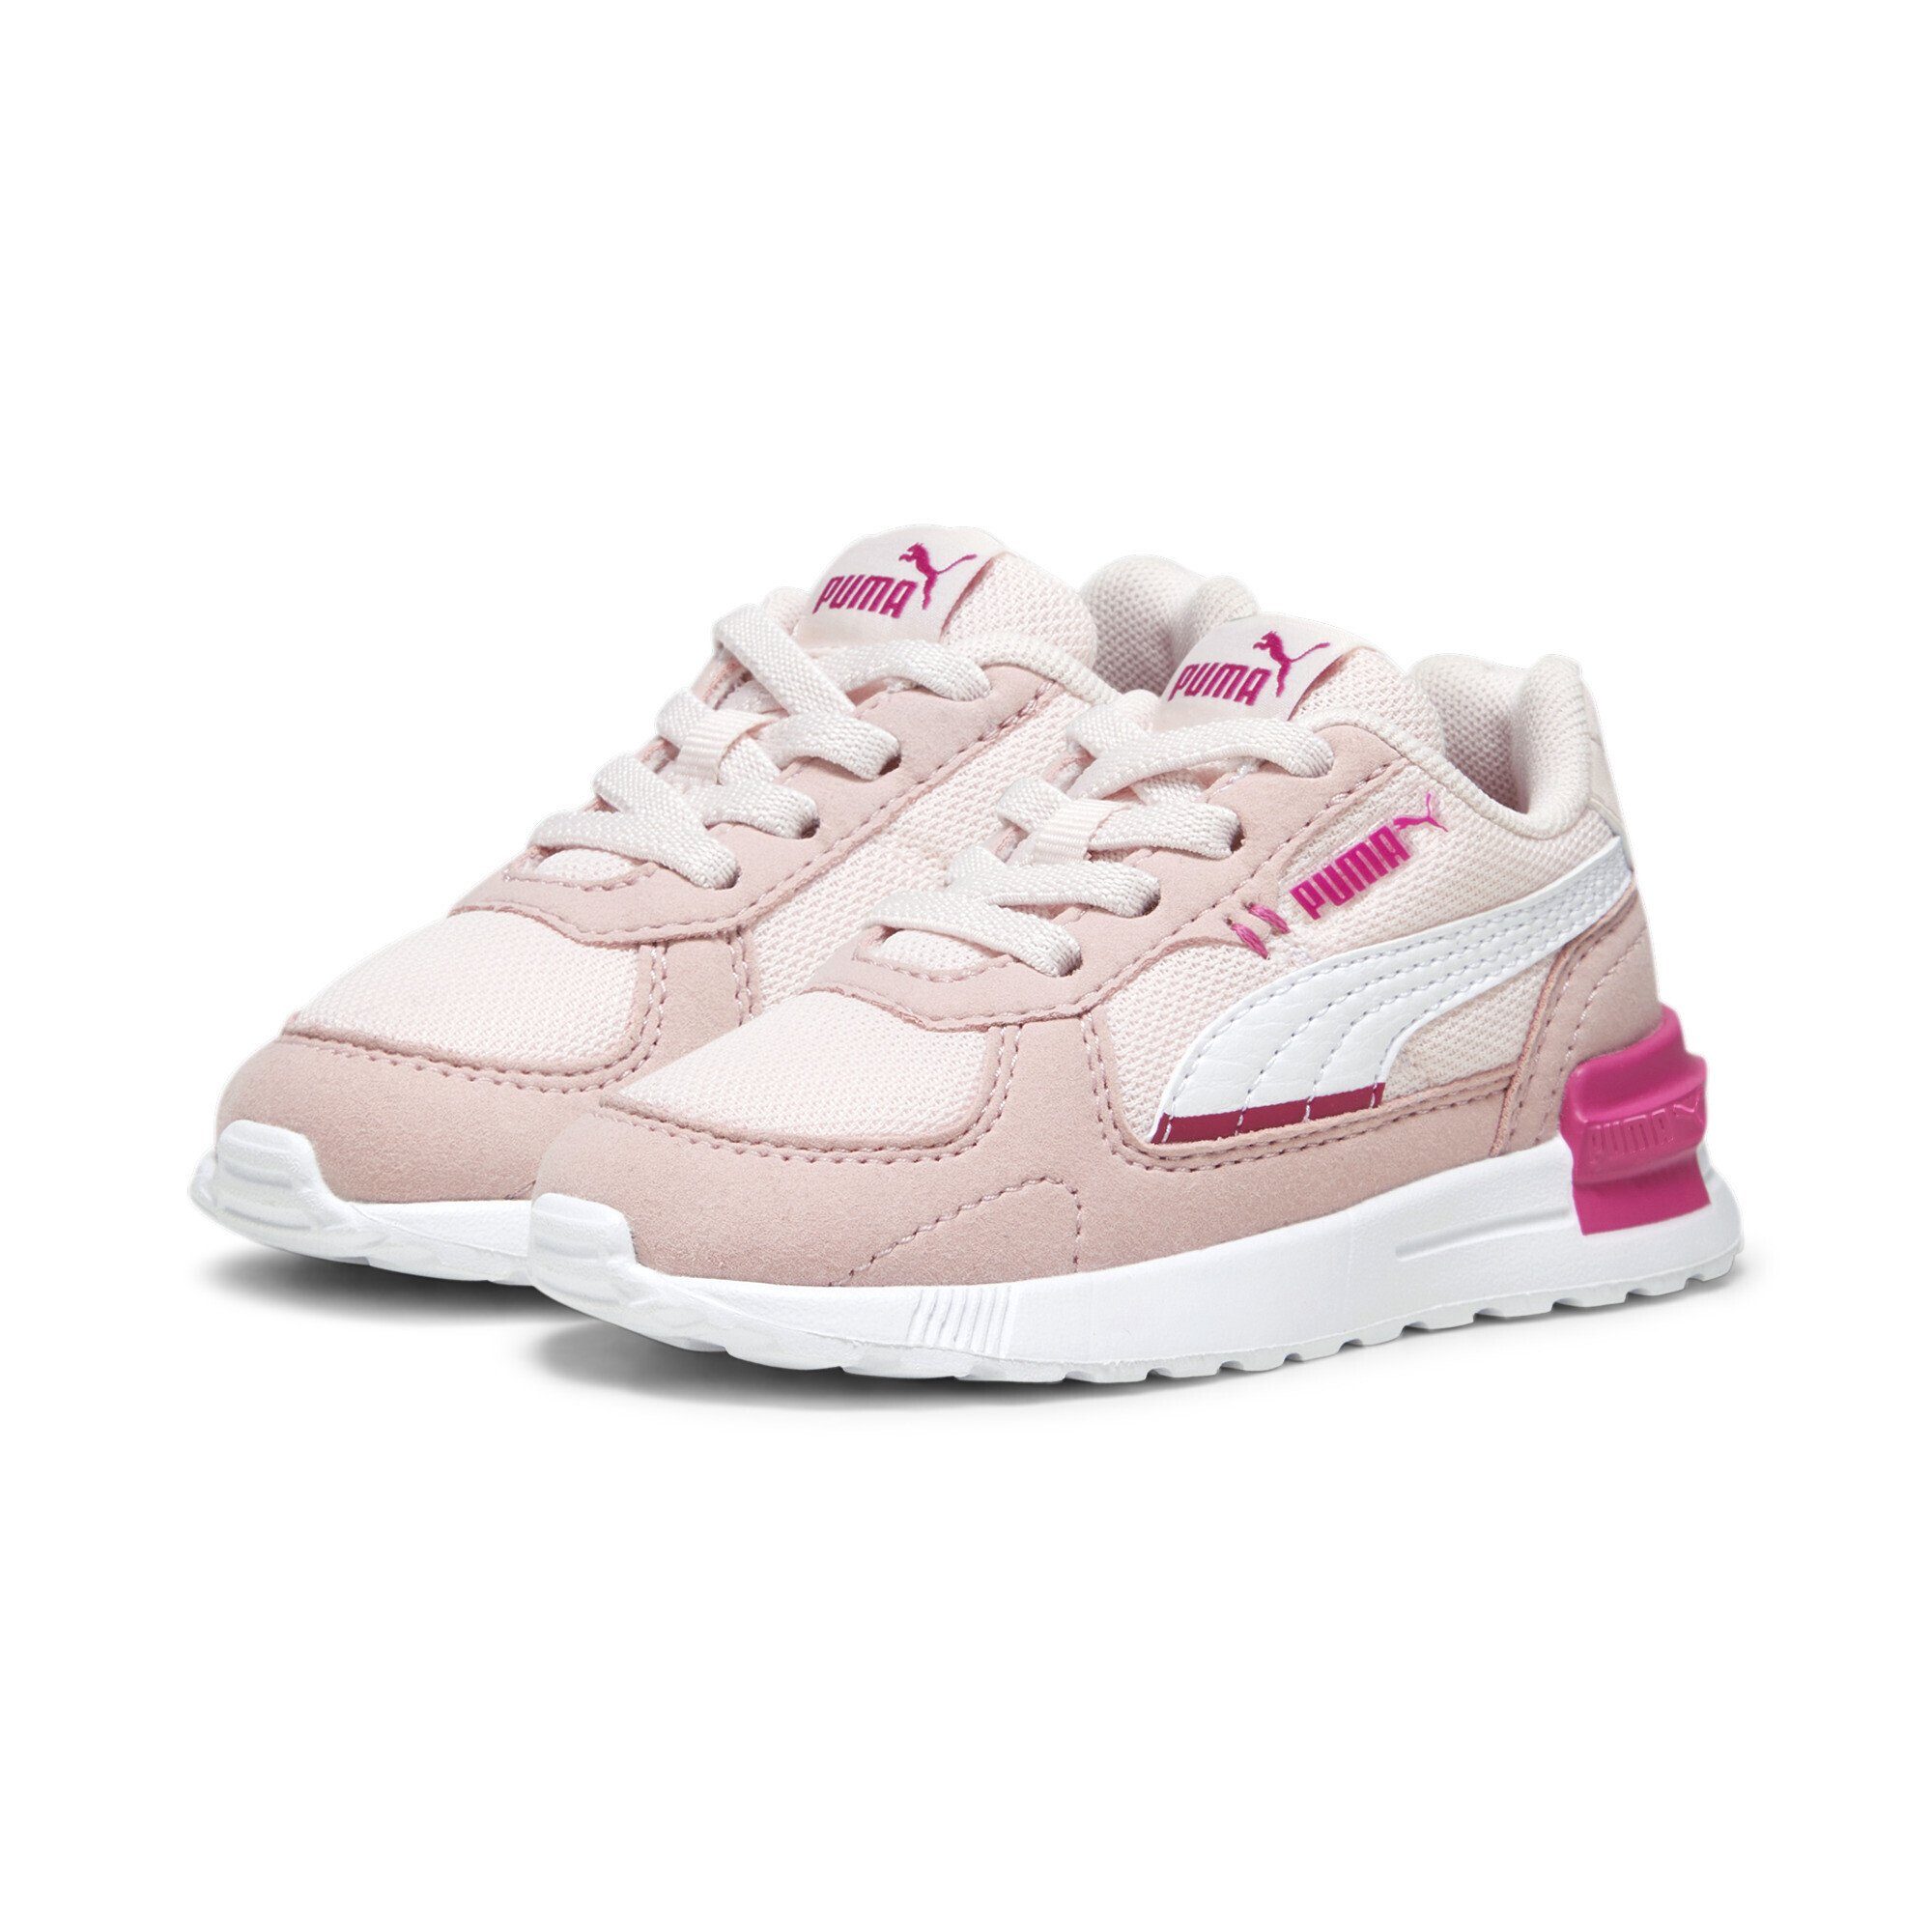 PUMA Graviton AC Sneakers Kinder Sneaker Frosty Pink White Future Pinktastic | Fitnessschuhe